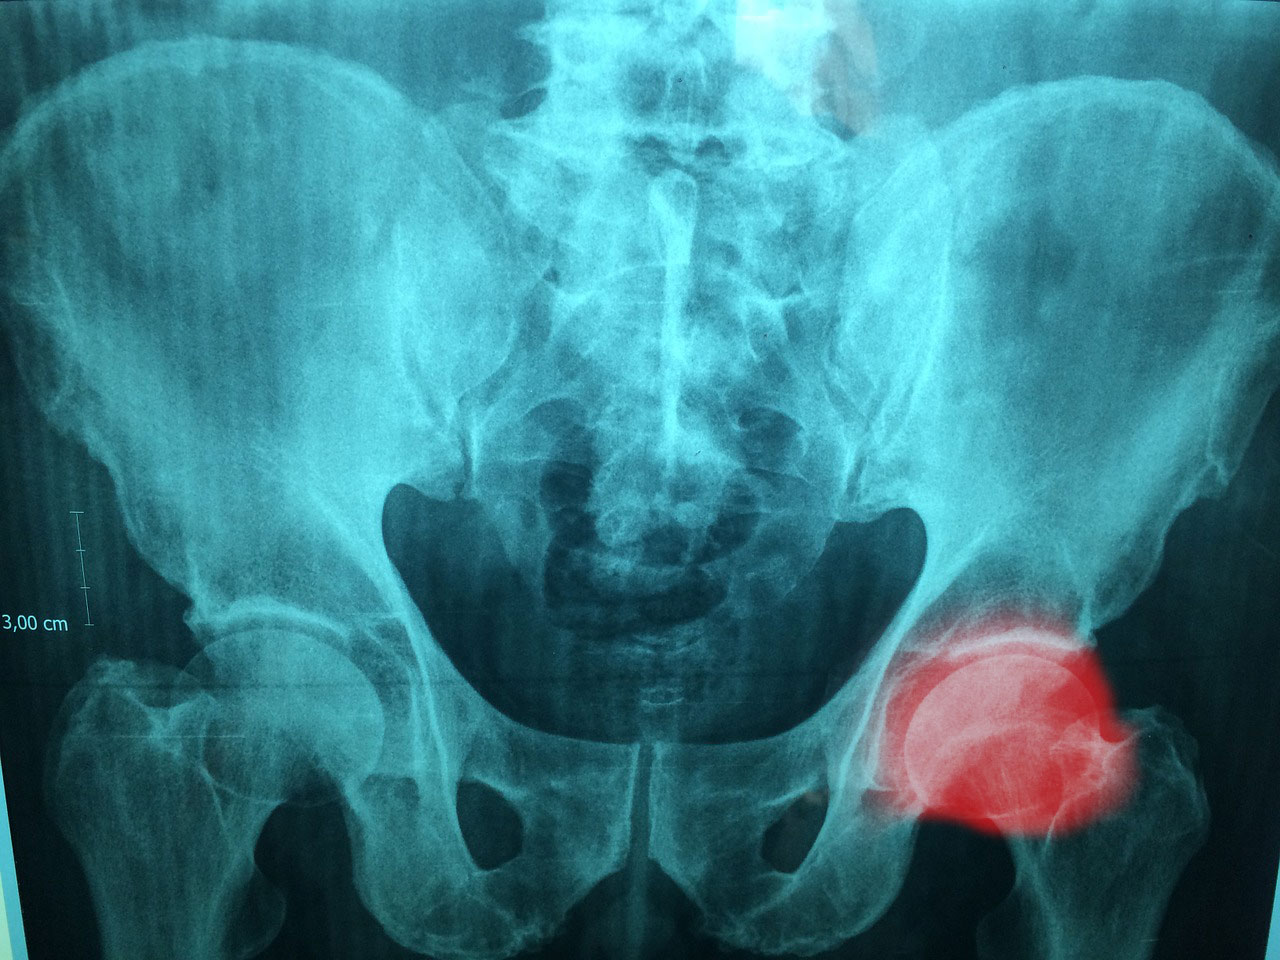 hip joint inflammation